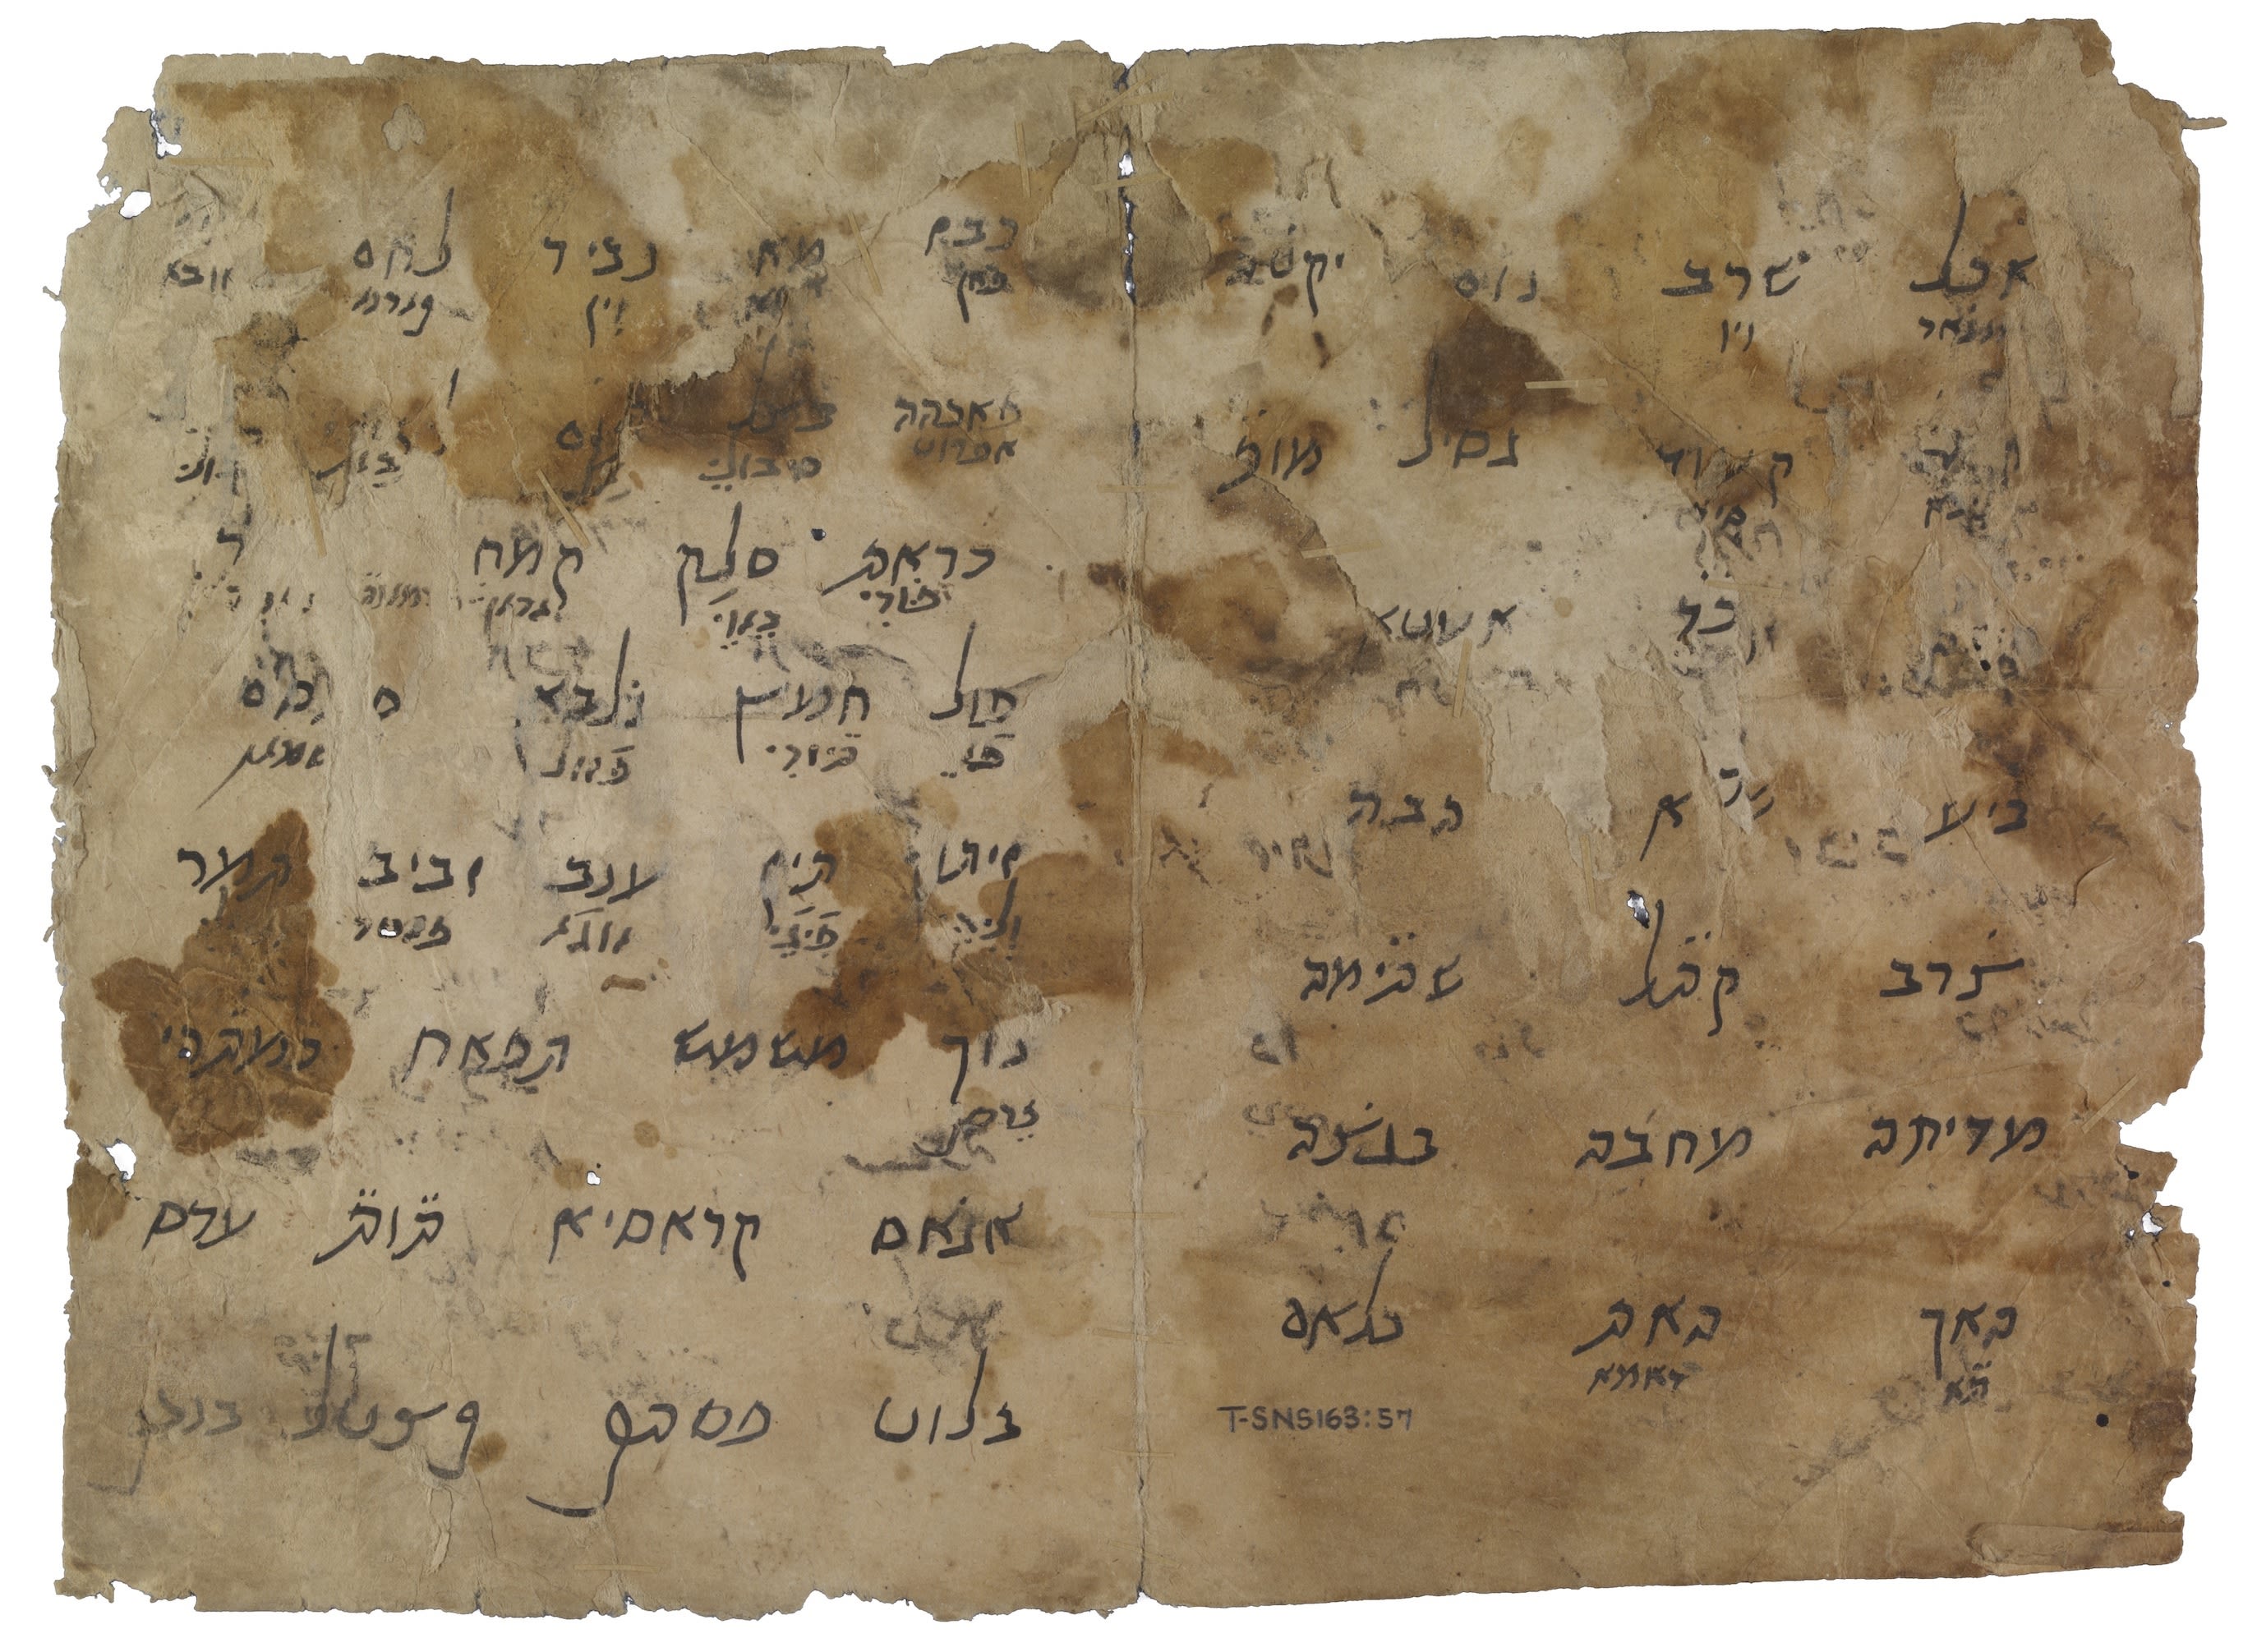 Two pages from Maimonides’ notebook in which he has listed words in Judaeo-Arabic and given Judaeo-Romance translations beneath.